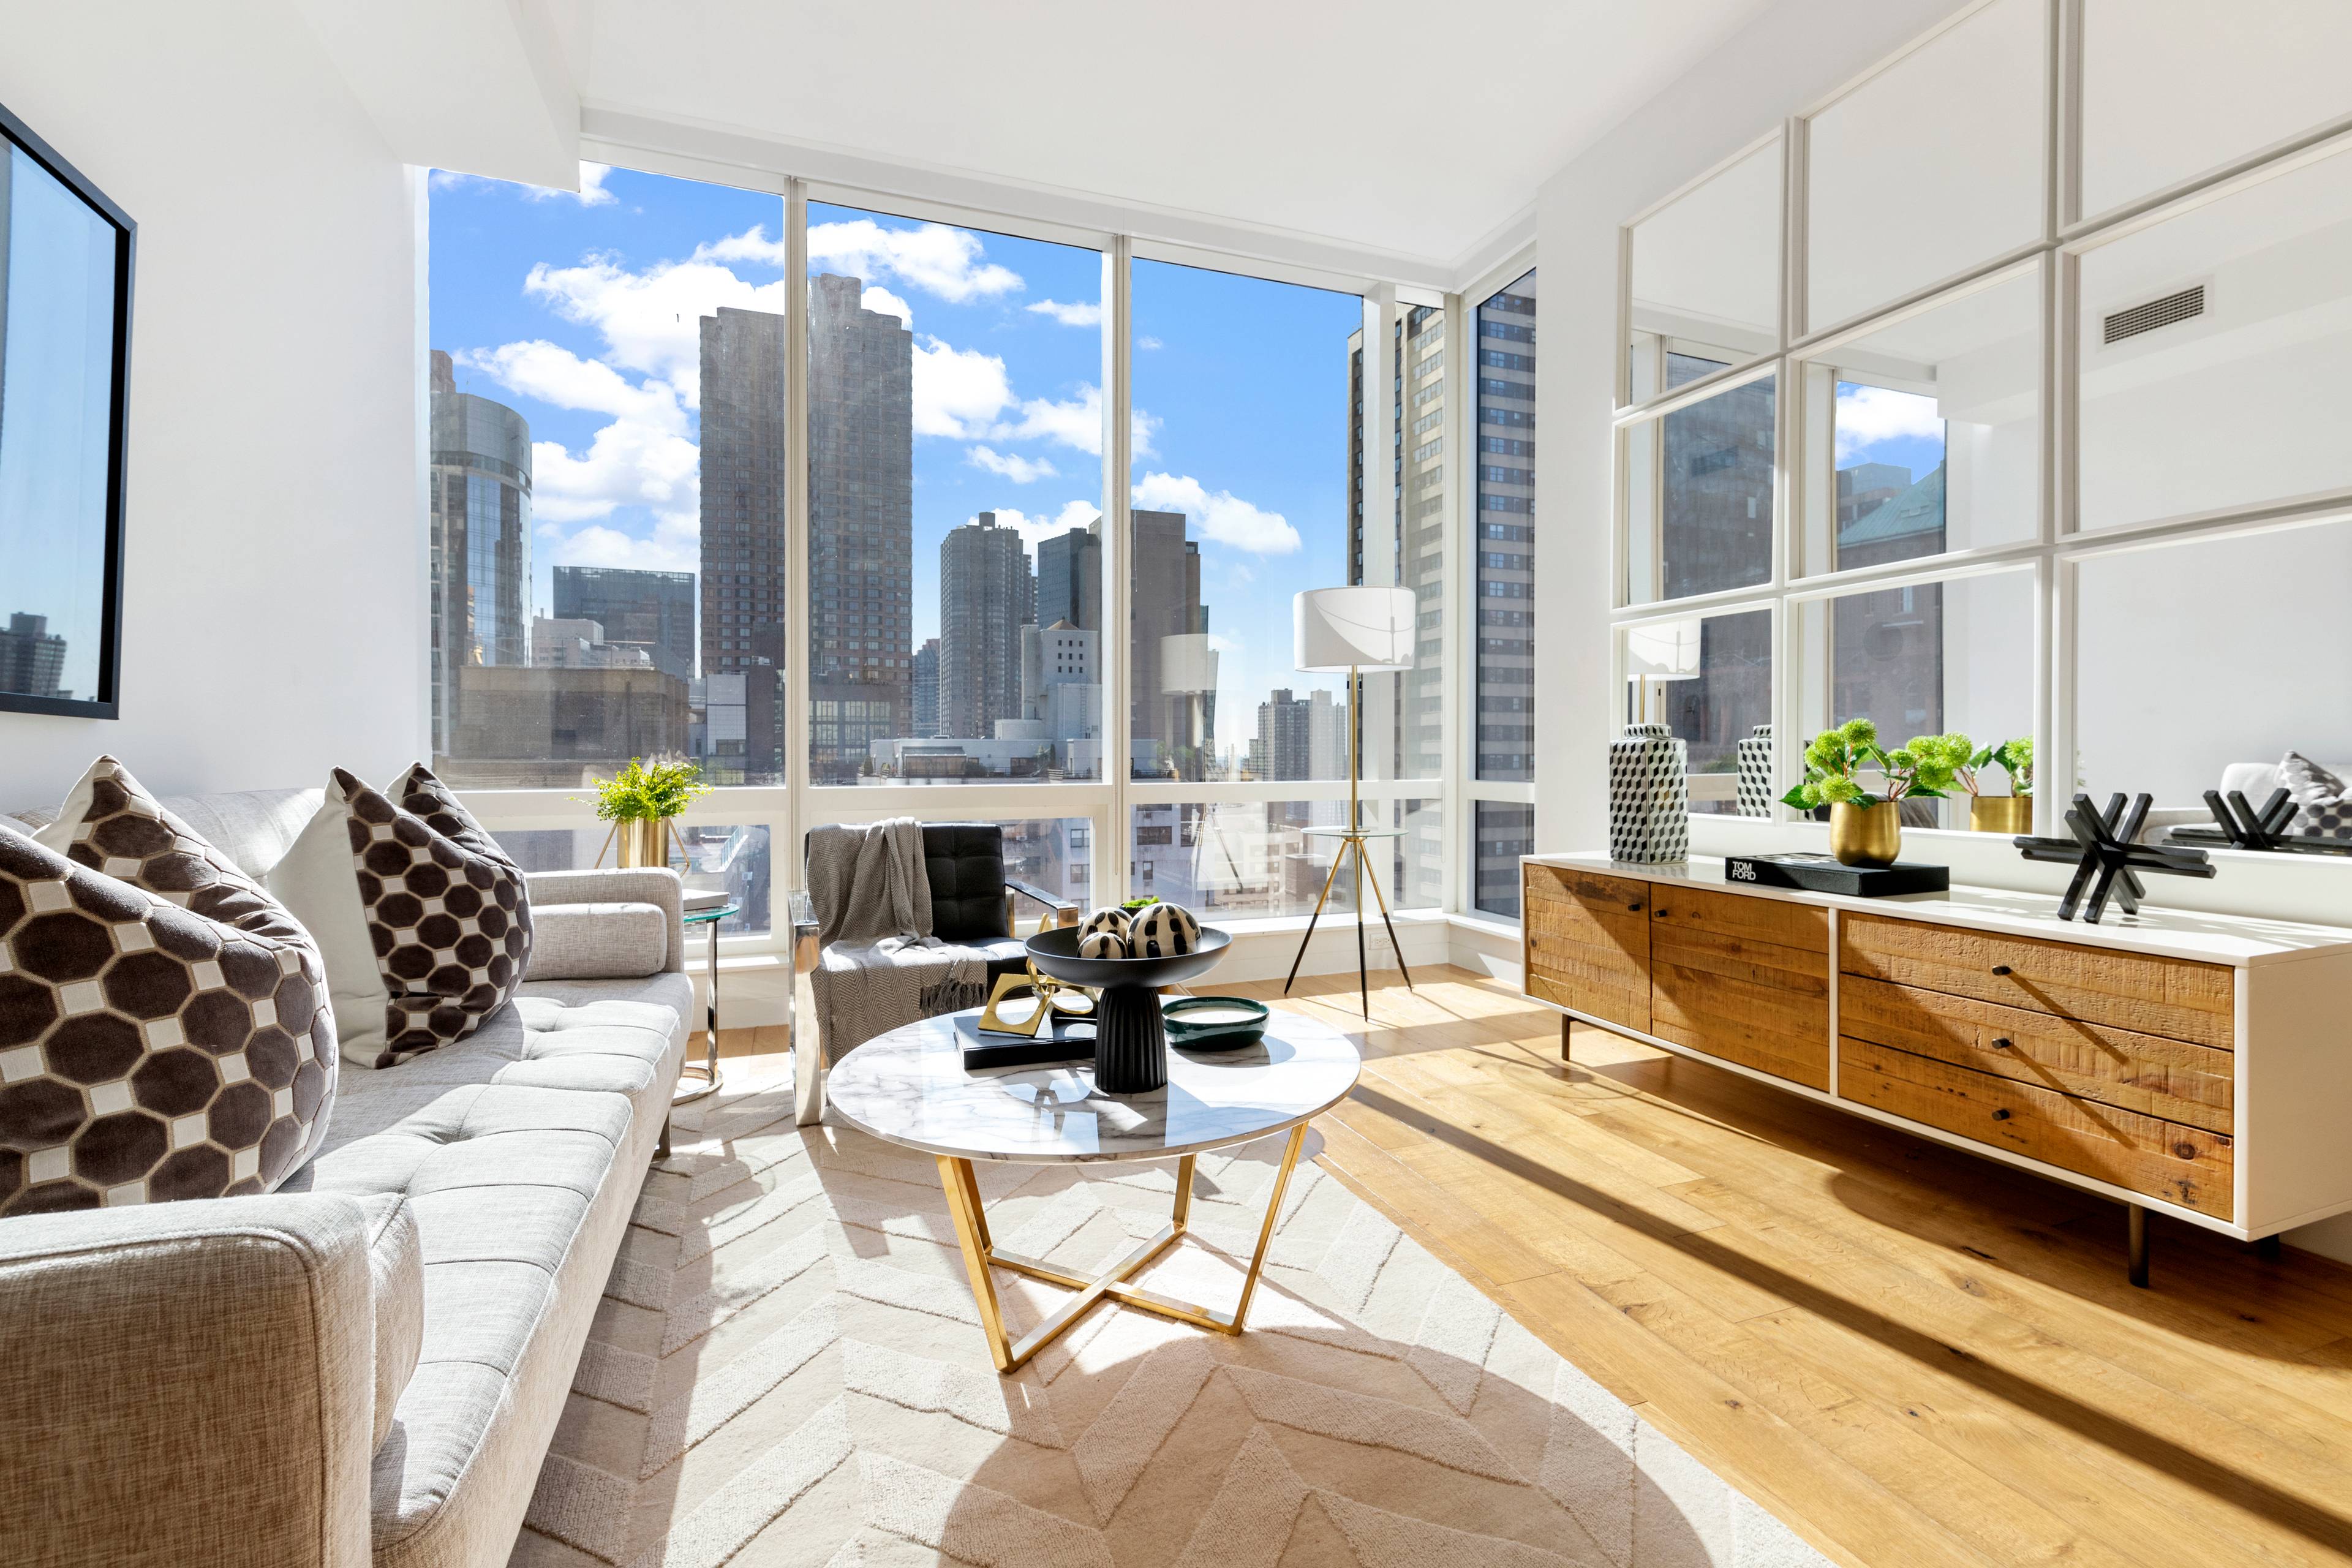 This one bedroom one bathroom apartment features soaring ceilings, floor to ceiling windows with sunny Eastern and Southern exposure and amazing views of the East River and city skyline.